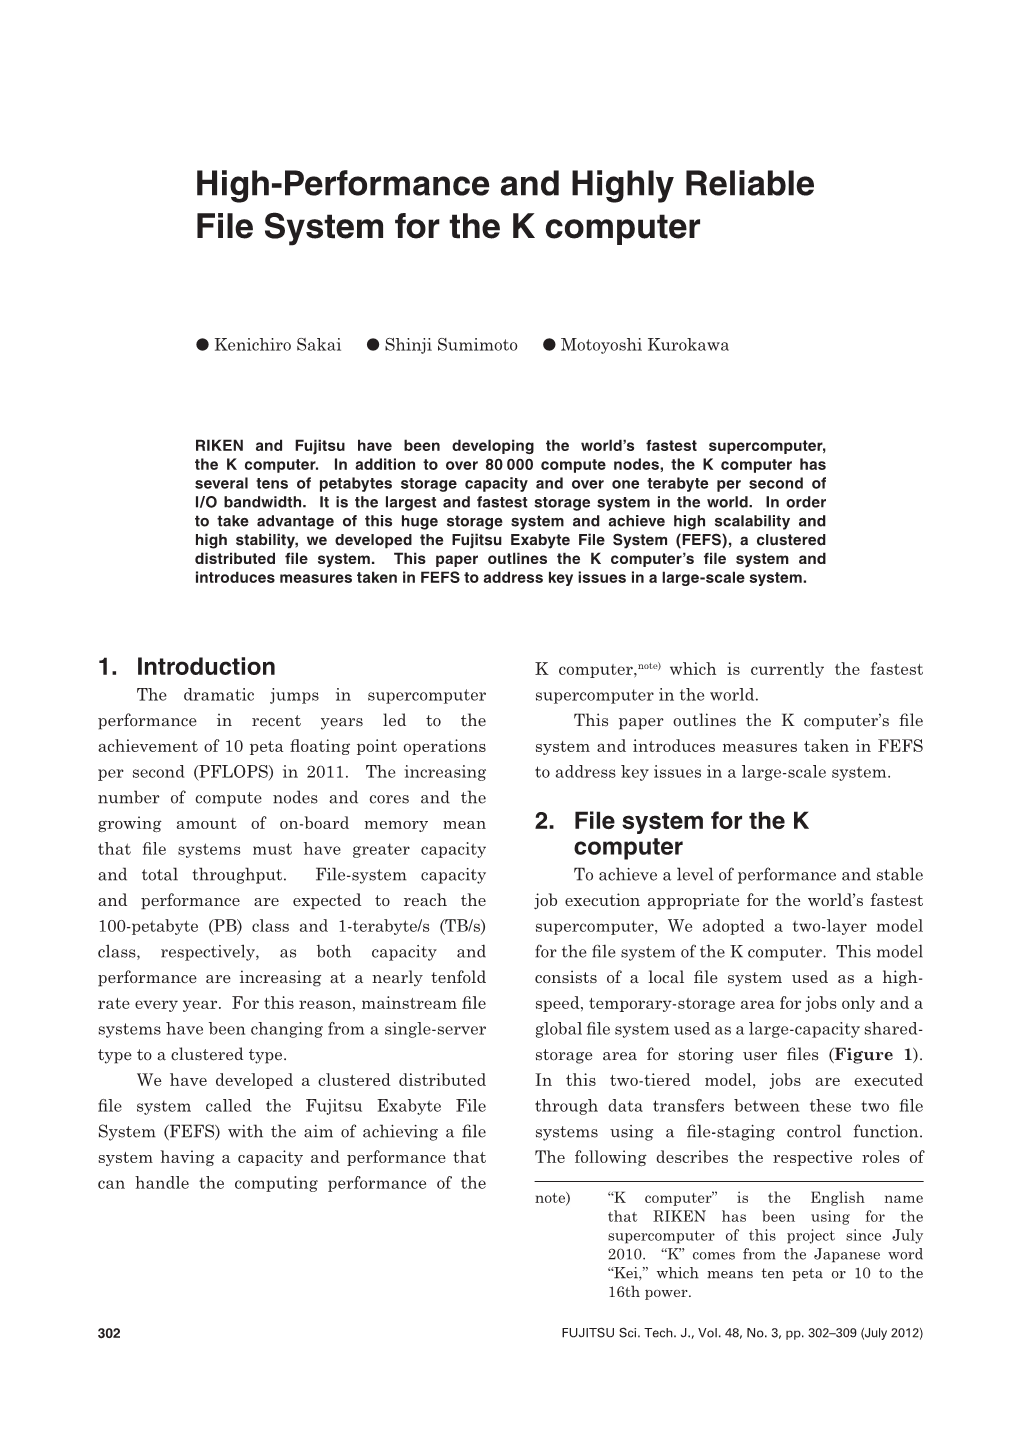 High-Performance and Highly Reliable File System for the K Computer